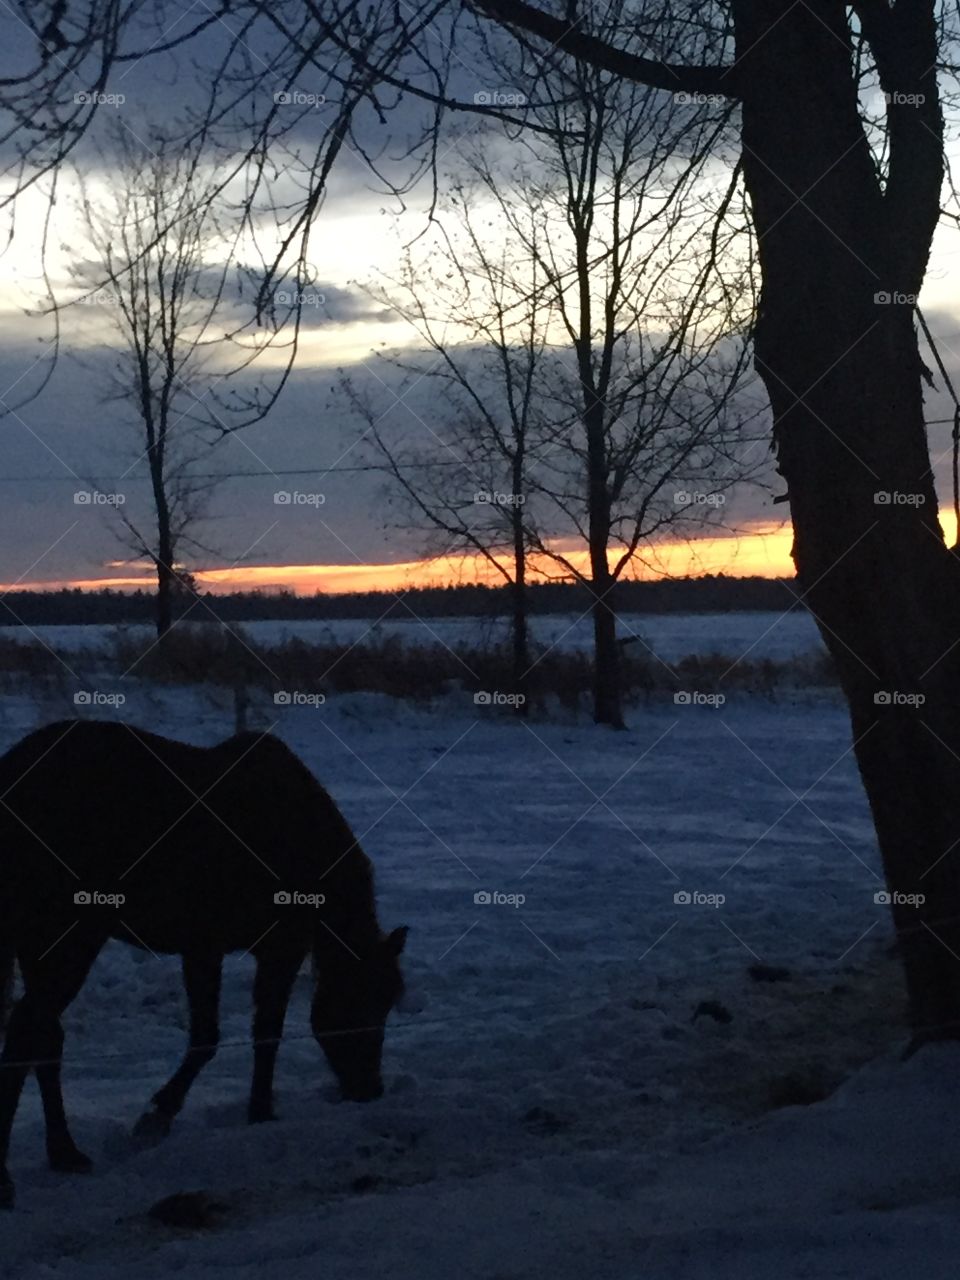 Sunrise giving birth to a brand new day Soft silhouette in the foreground of a horse in a tree